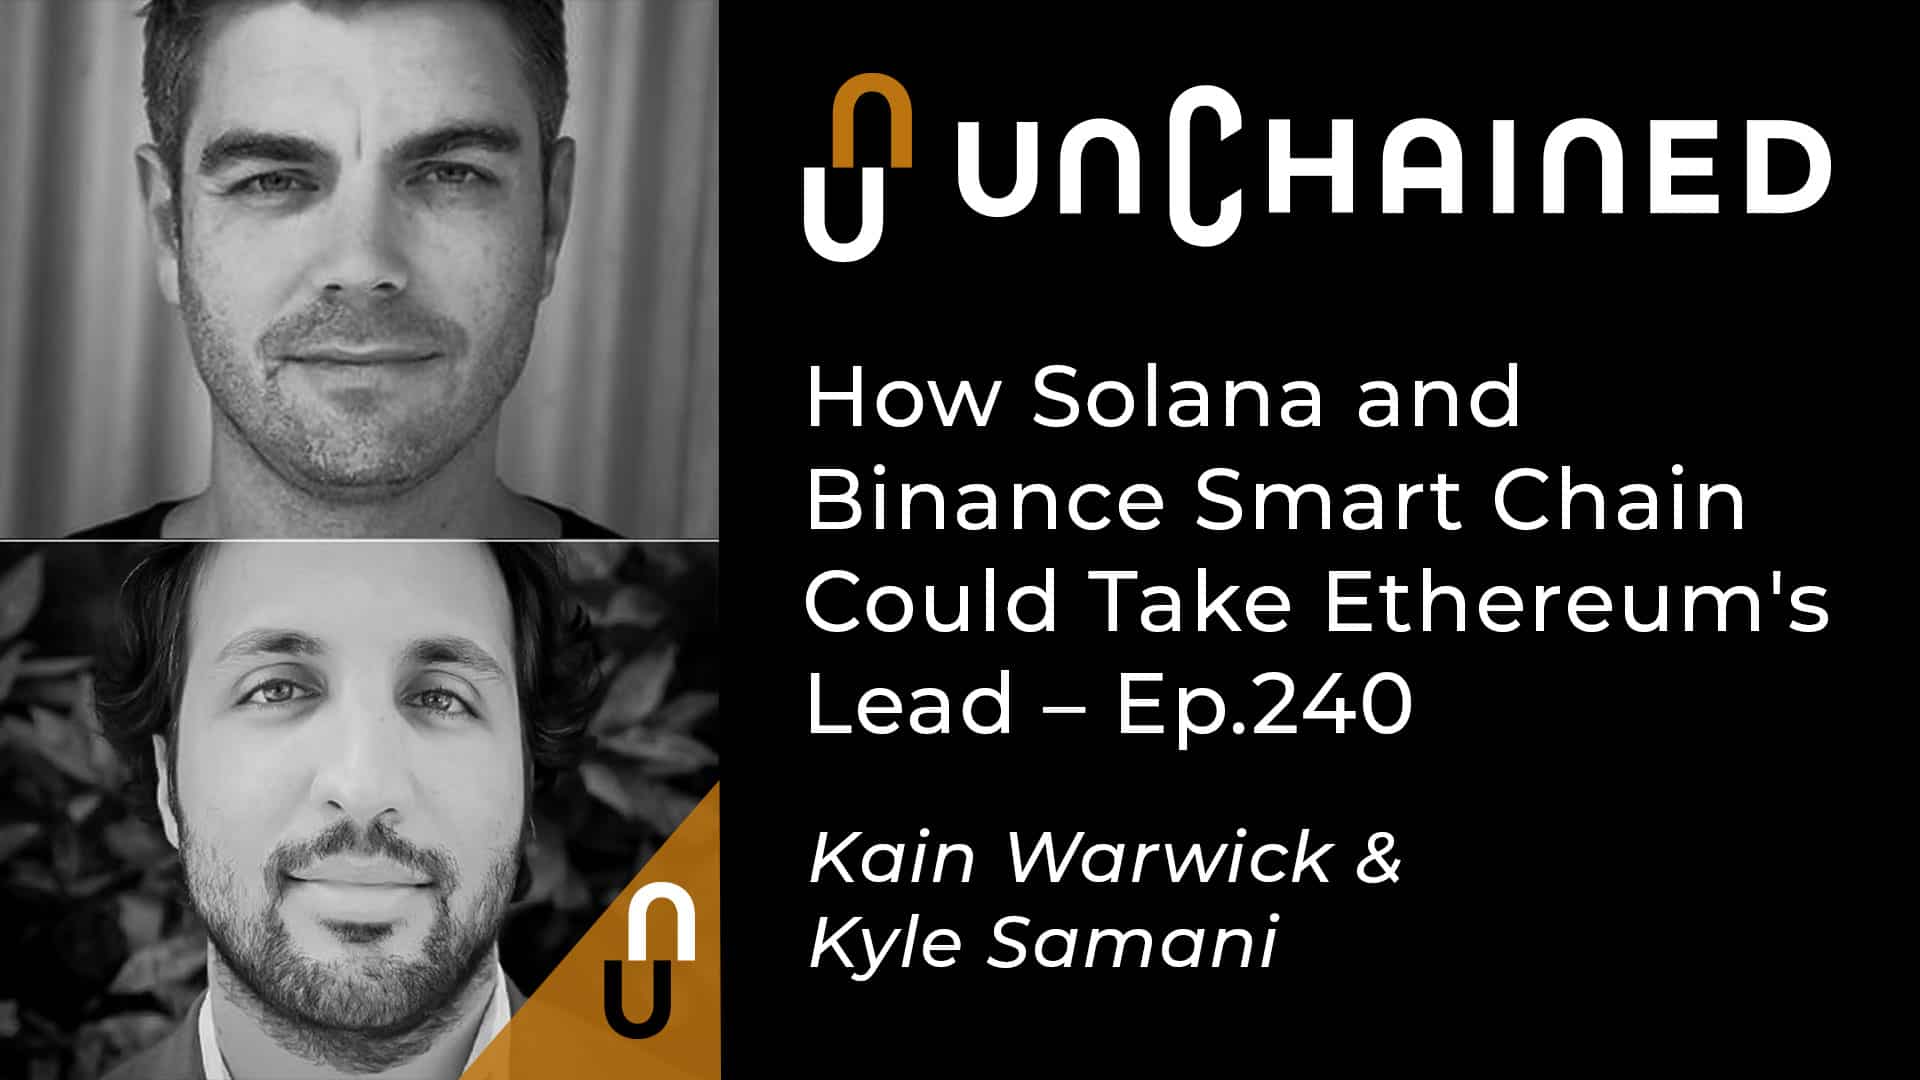 Unchained - Ep.240 - How Solana and Binance Smart Chain Could Take Ethereum's Lead